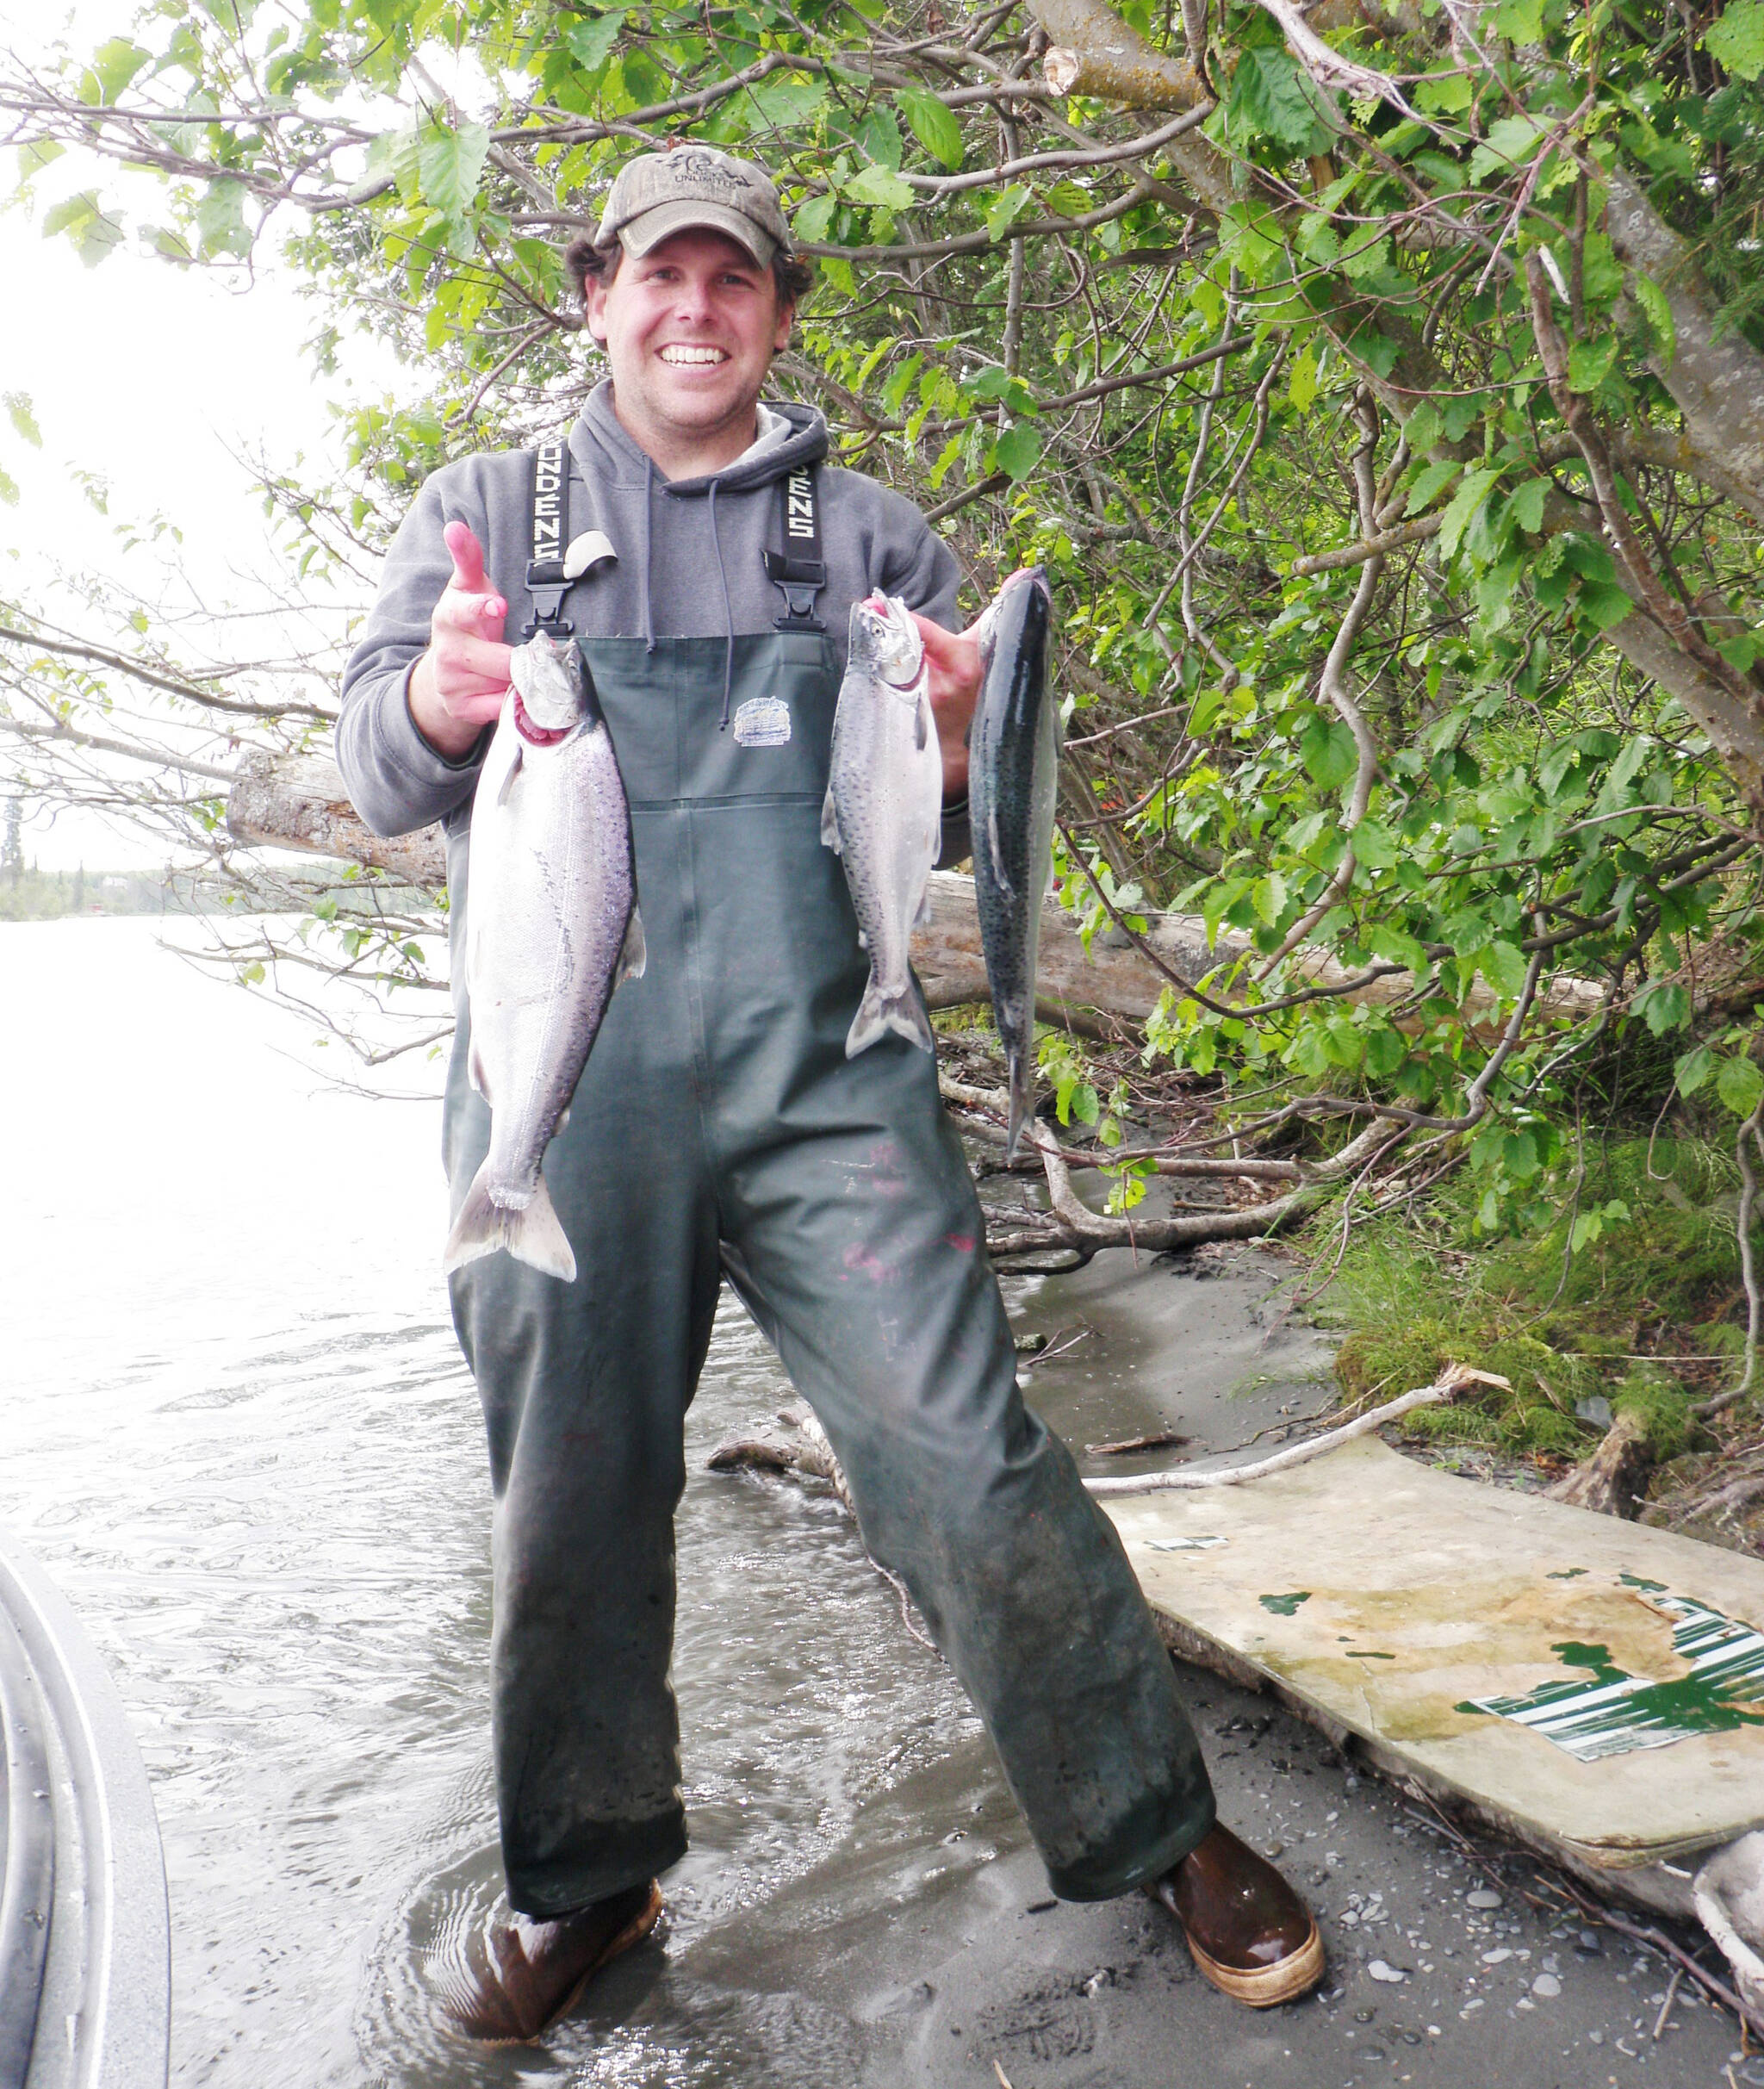 Some great examples of genetic diversity with Kenai River king salmon populations. (Photo by Ken Gates)